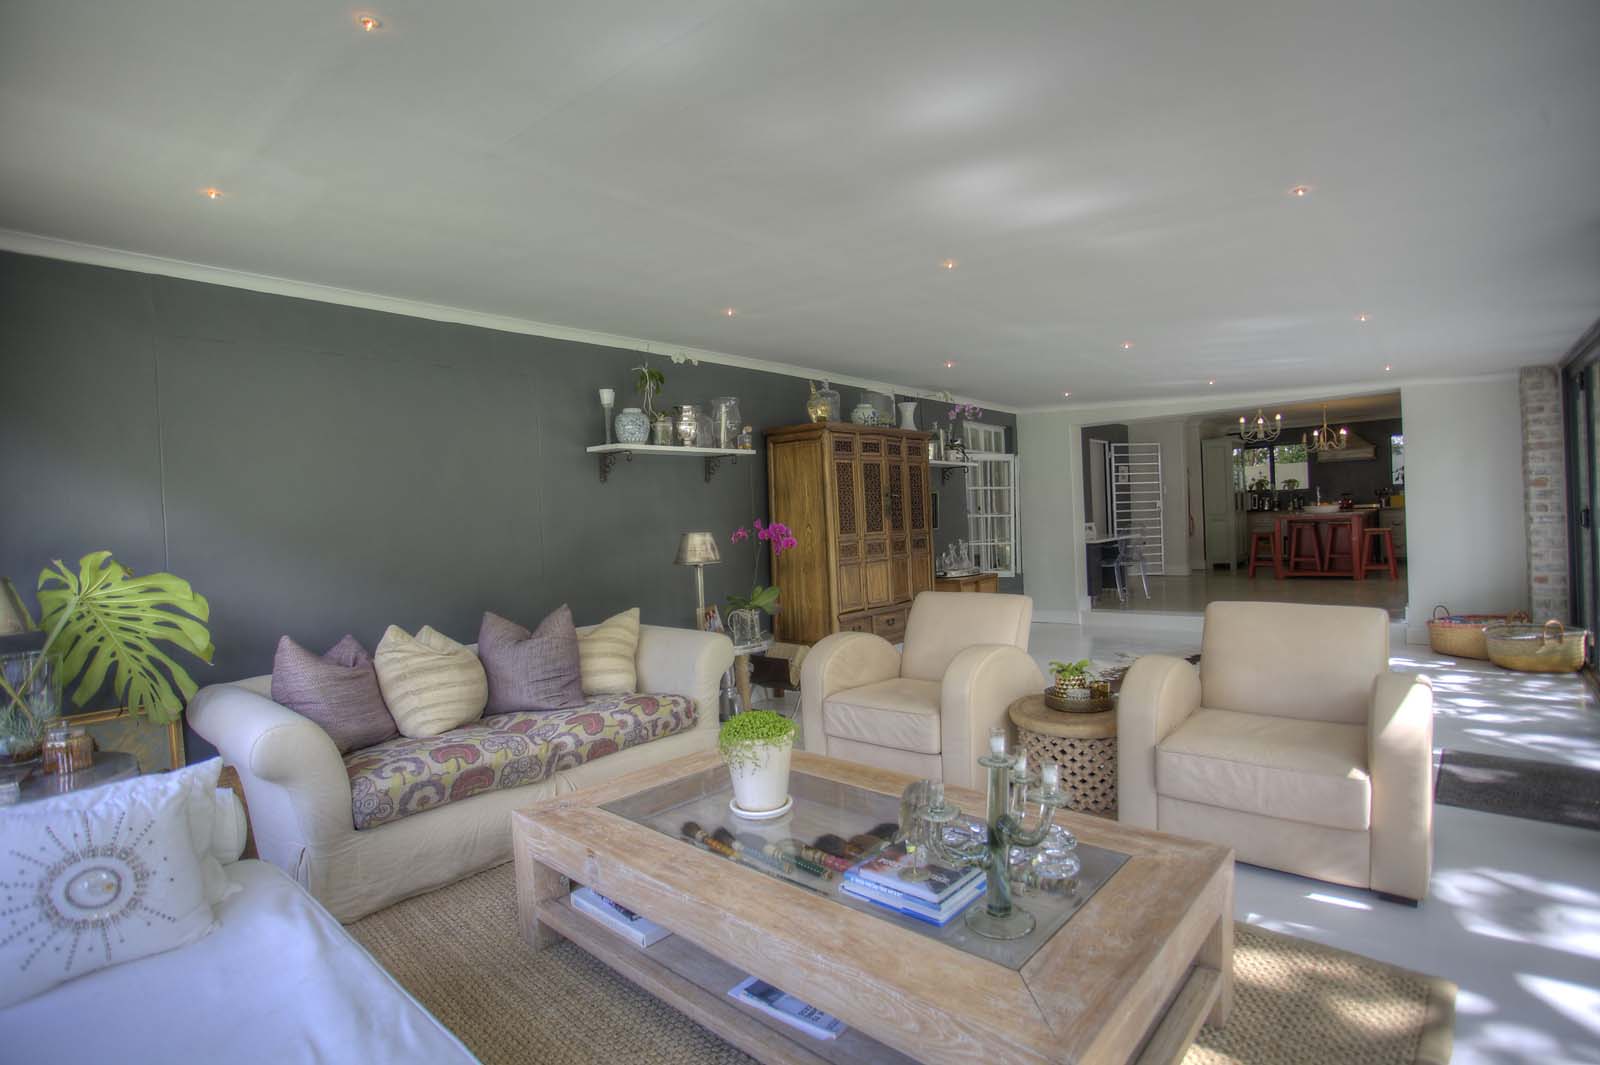 Photo 15 of Villa Robertson accommodation in Constantia, Cape Town with 4 bedrooms and 3 bathrooms